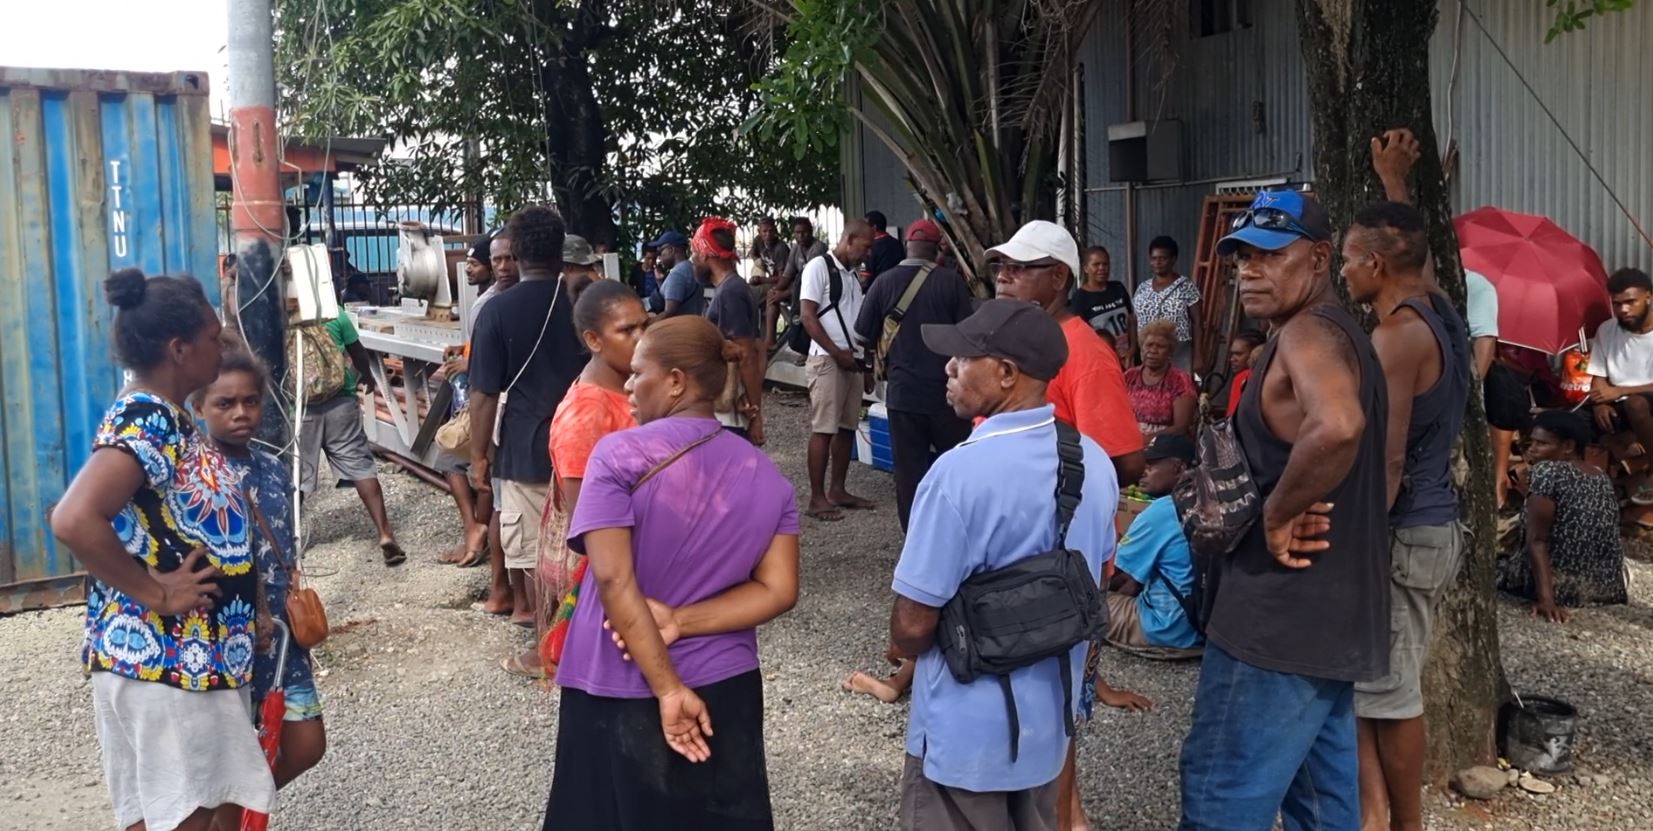 Temotu people stranded in Honiara due to poor shipping services